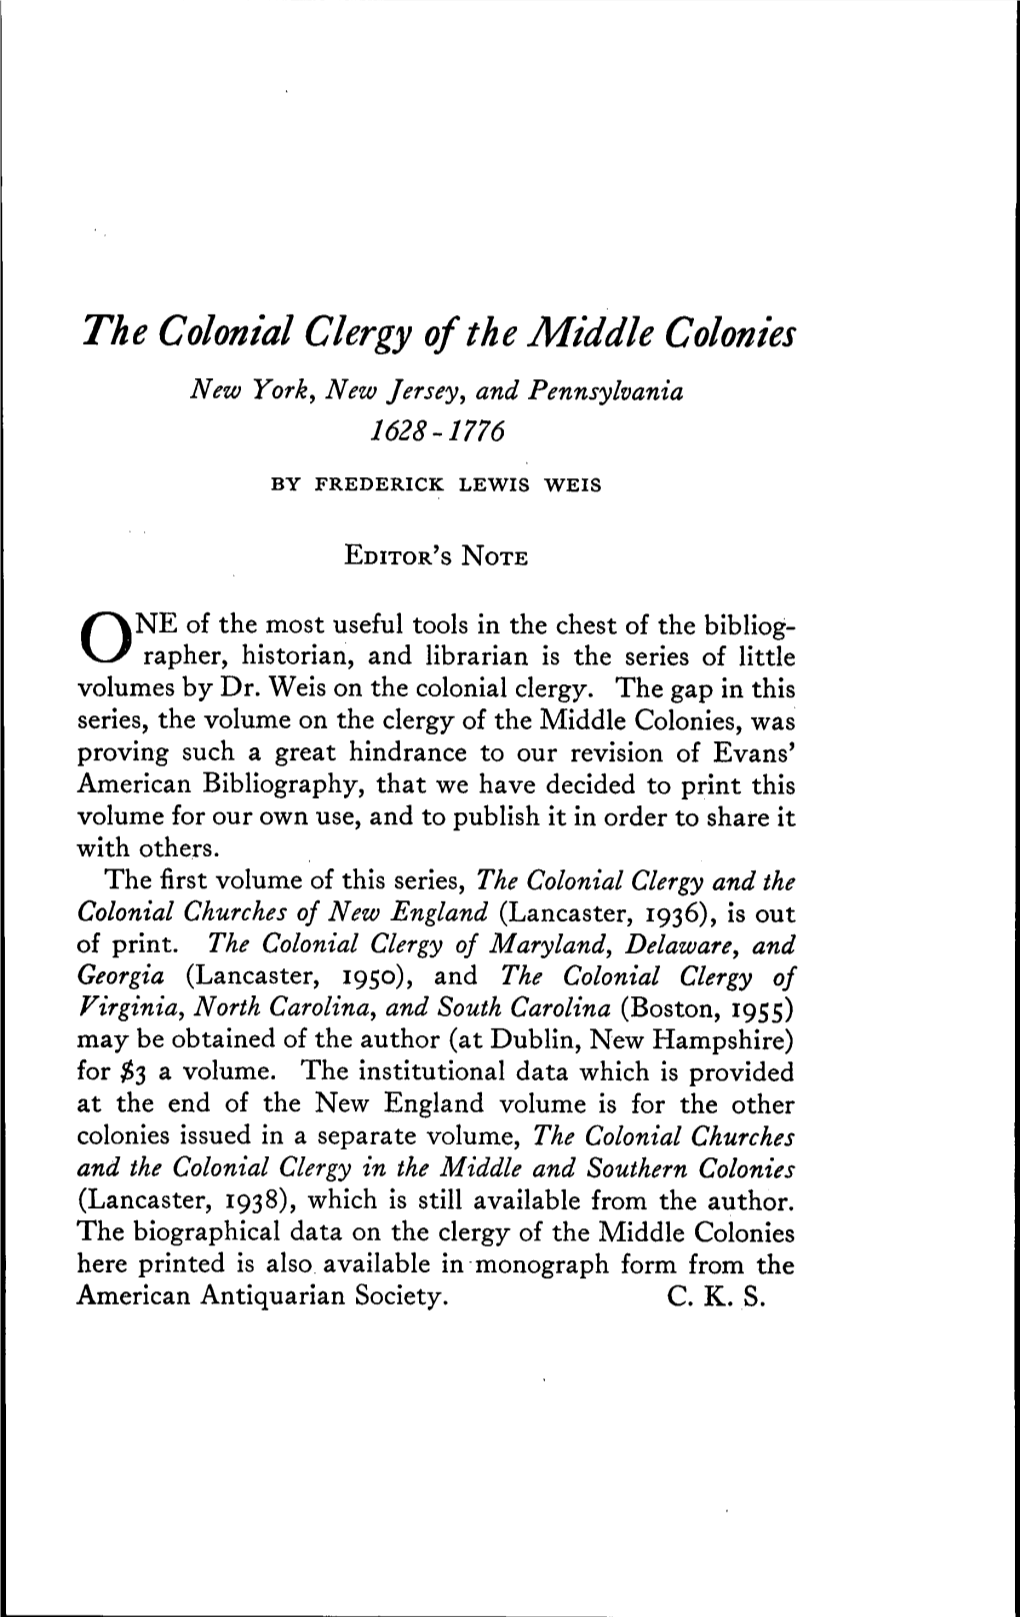 The Colonial Clergy of the Middle Colonies New York, New Jersey, and Pennsylvania 1628-1776